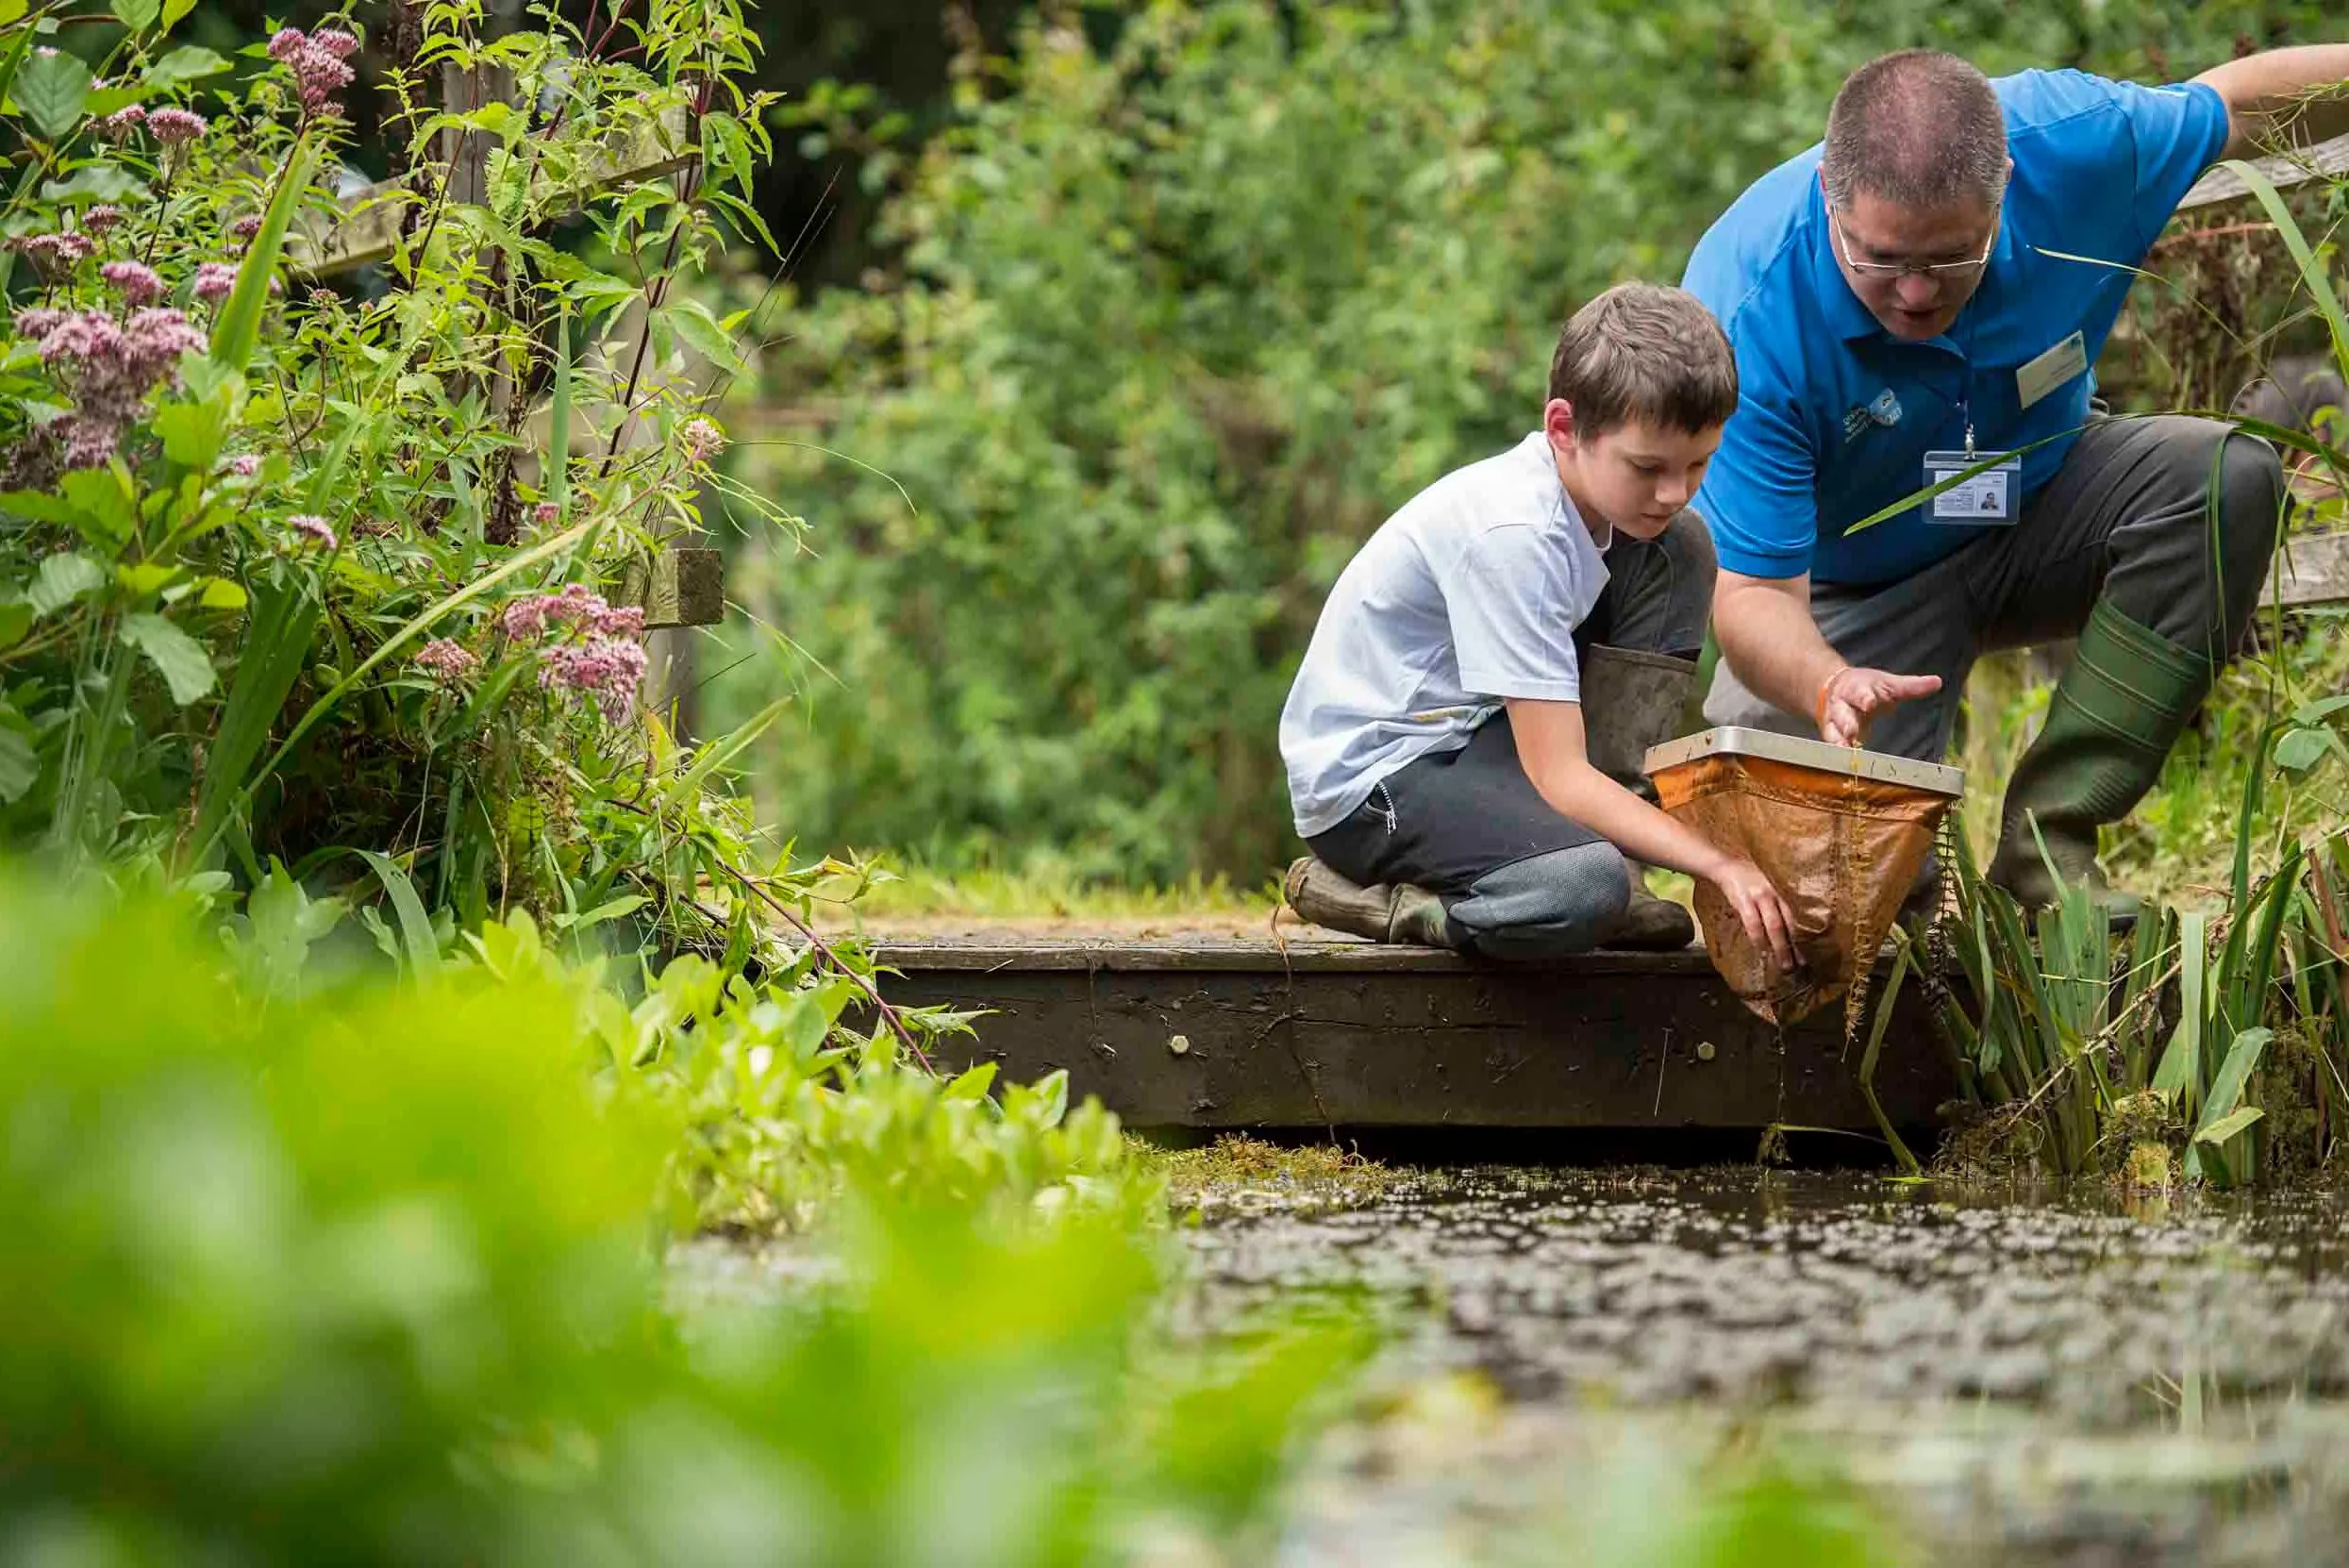 An adult in RSPB uniform and a child holding a pond dipping net, both crouched on decking by the edge of a pond.